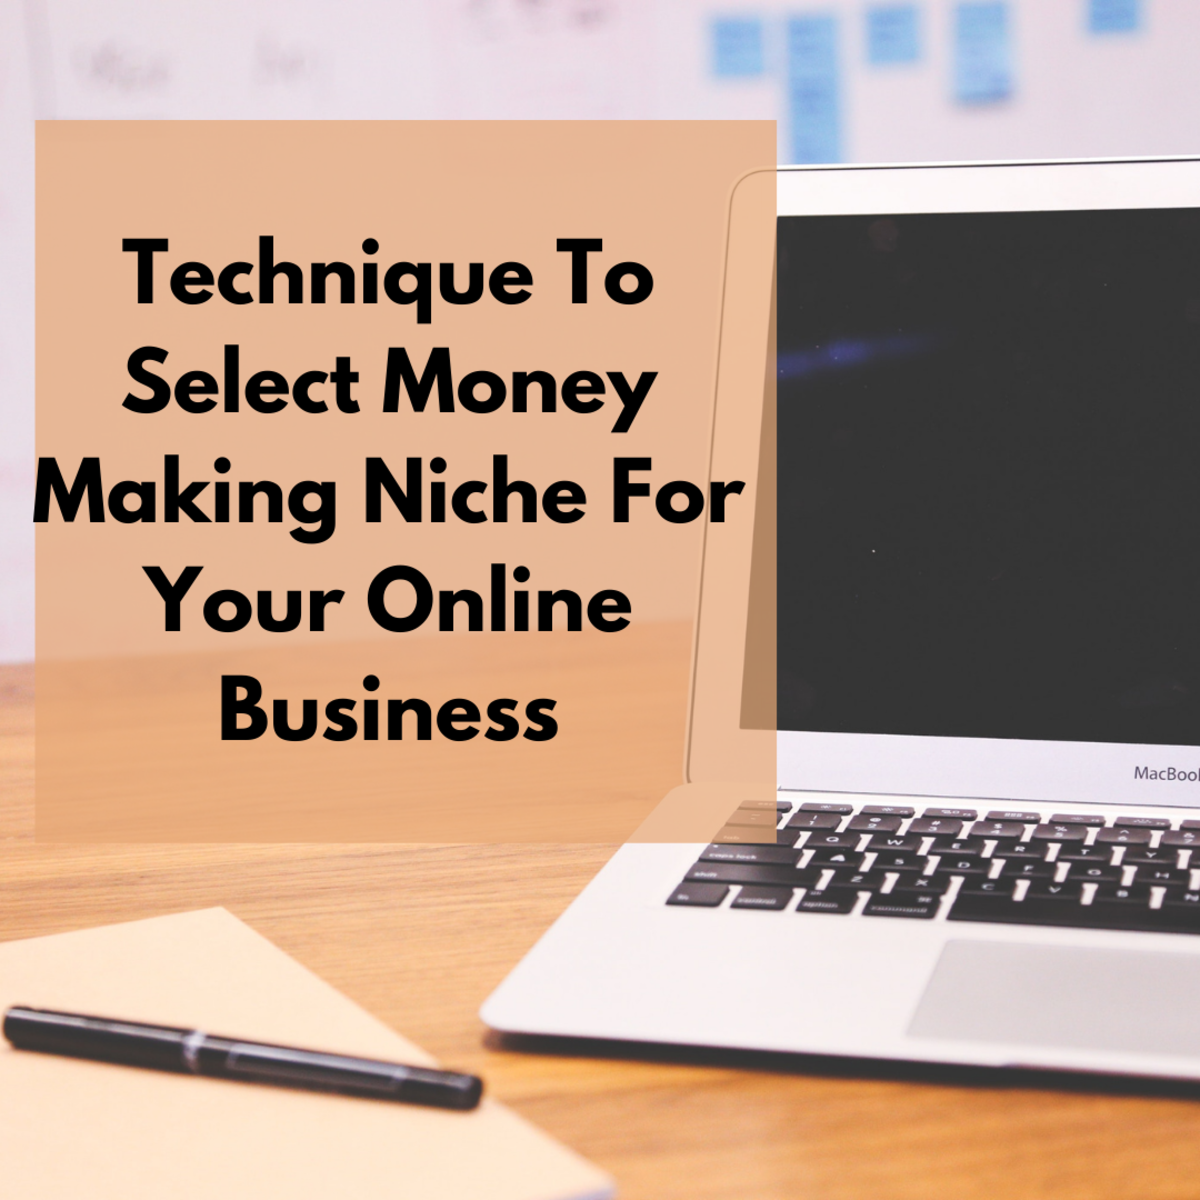 Technique To Select Money Making Niche For Your Online Business